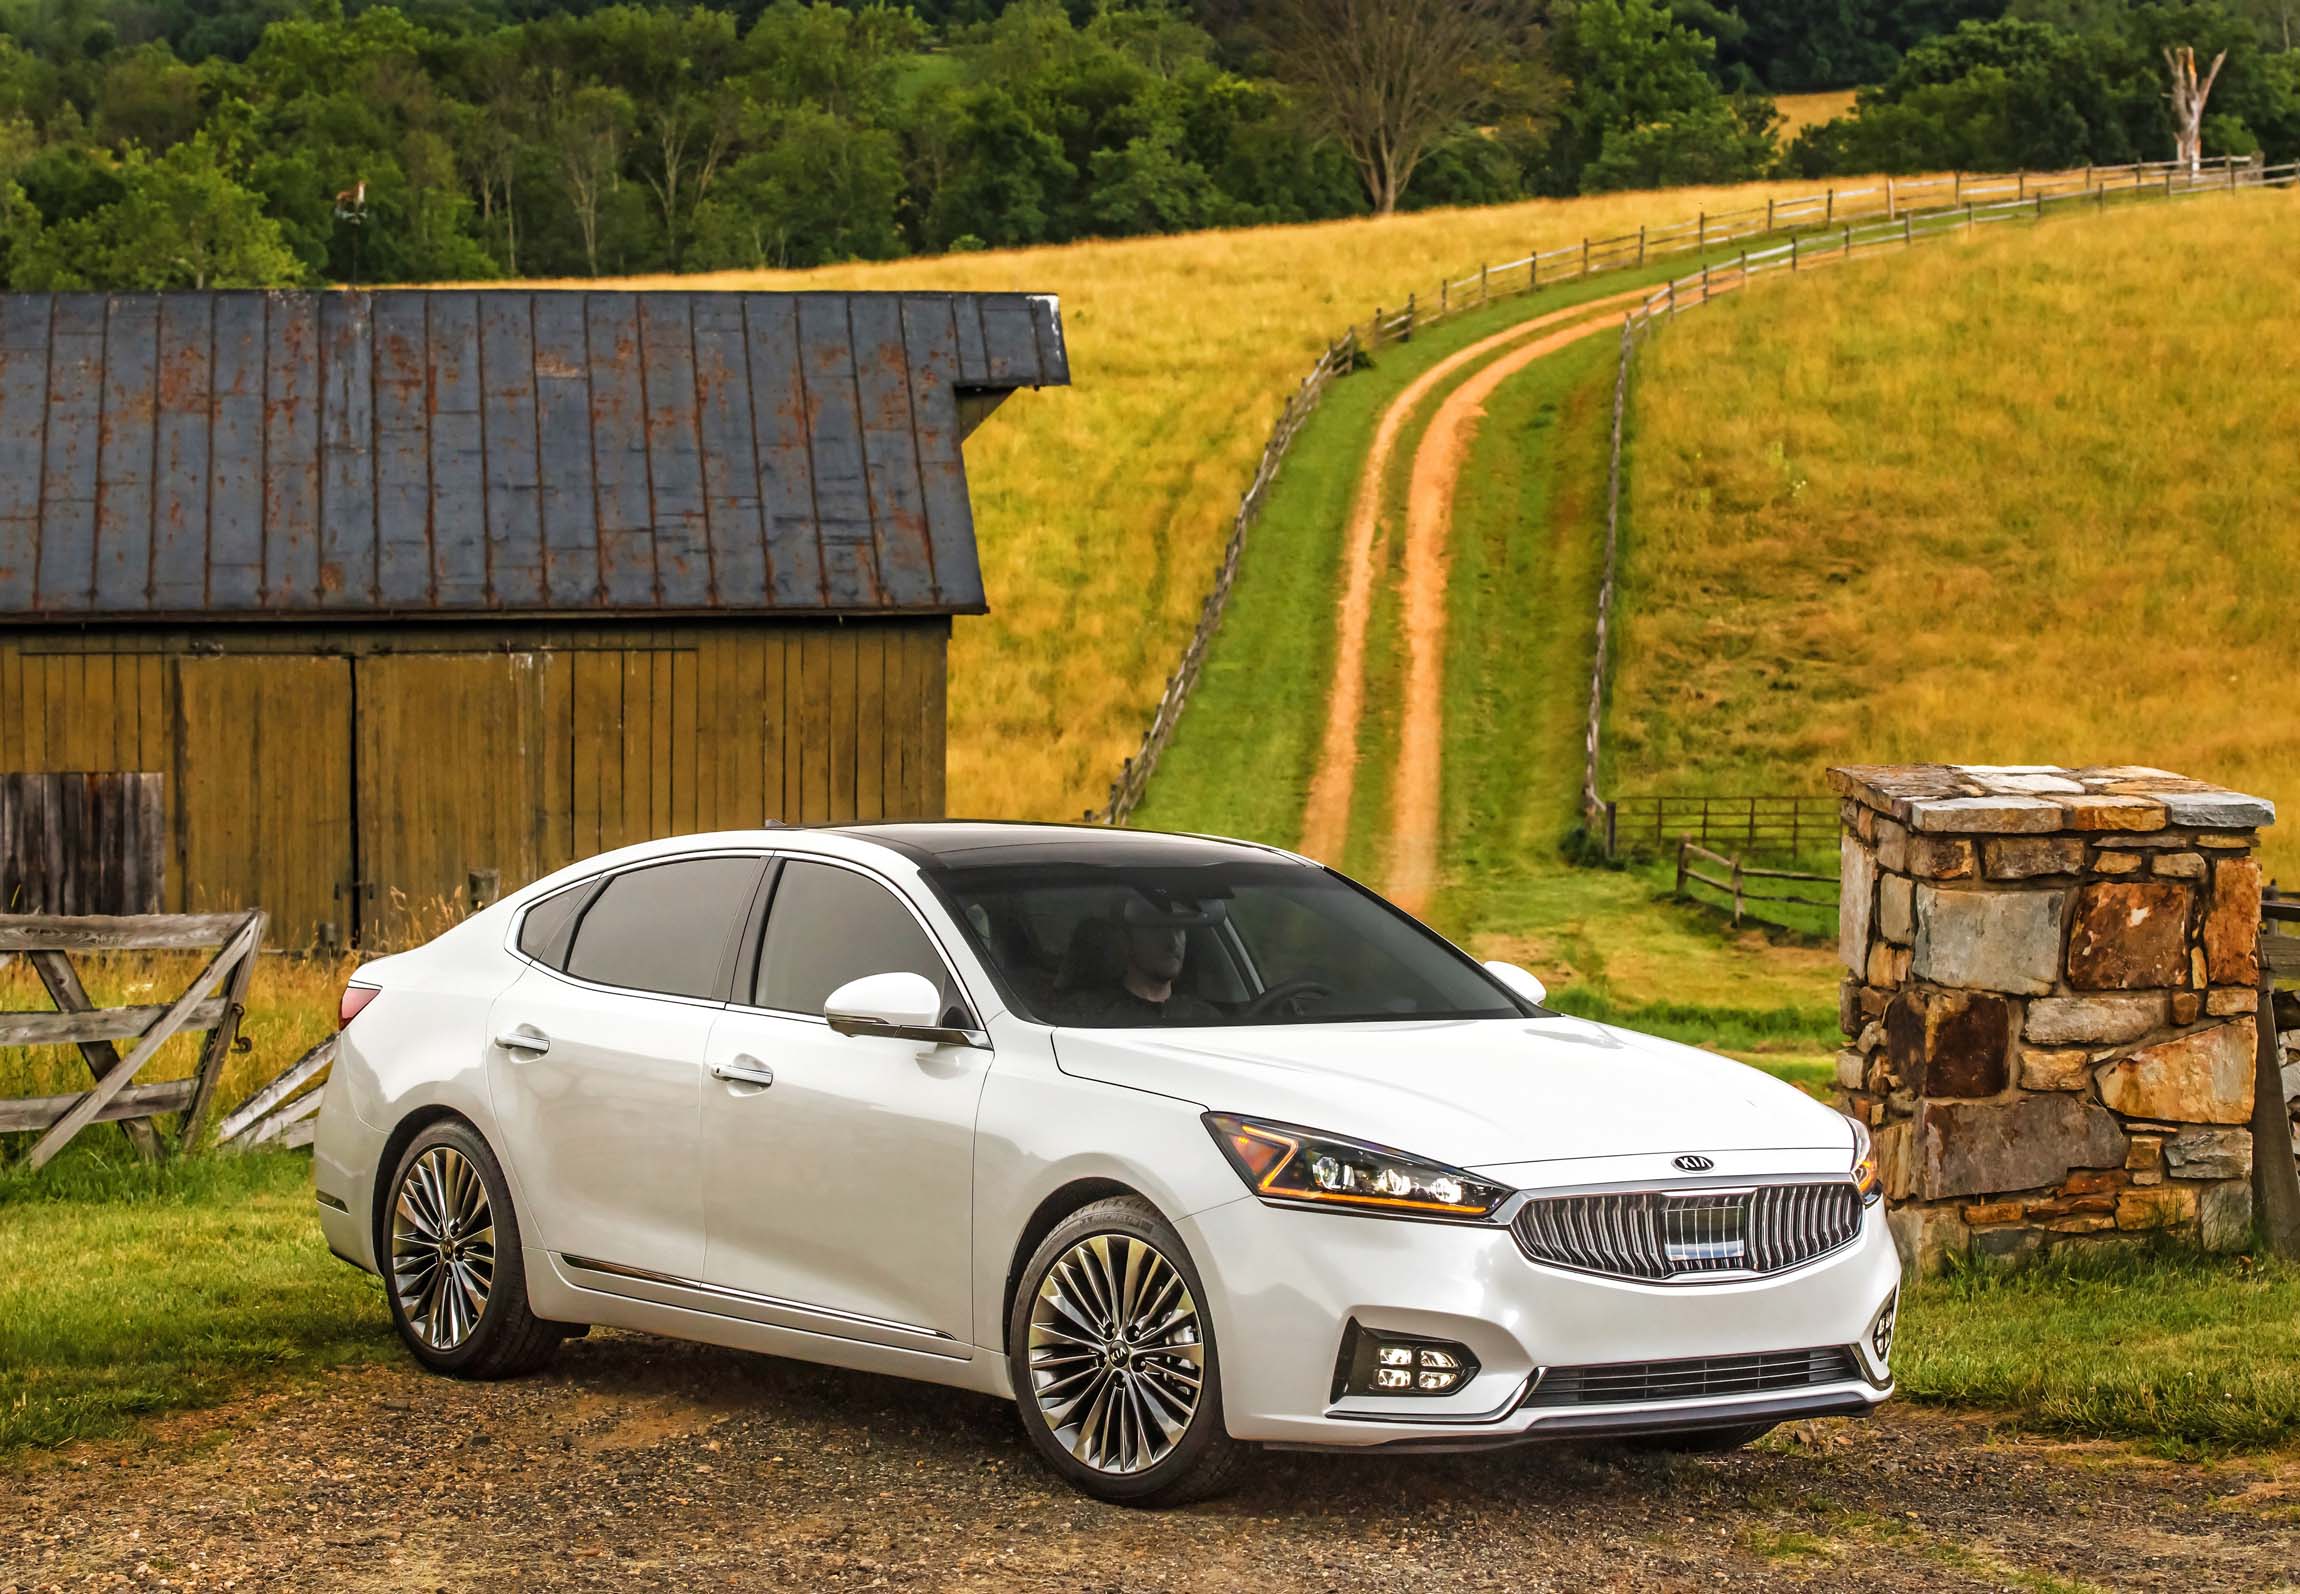 New and Used Kia Cadenza Prices, Photos, Reviews, Specs The Car